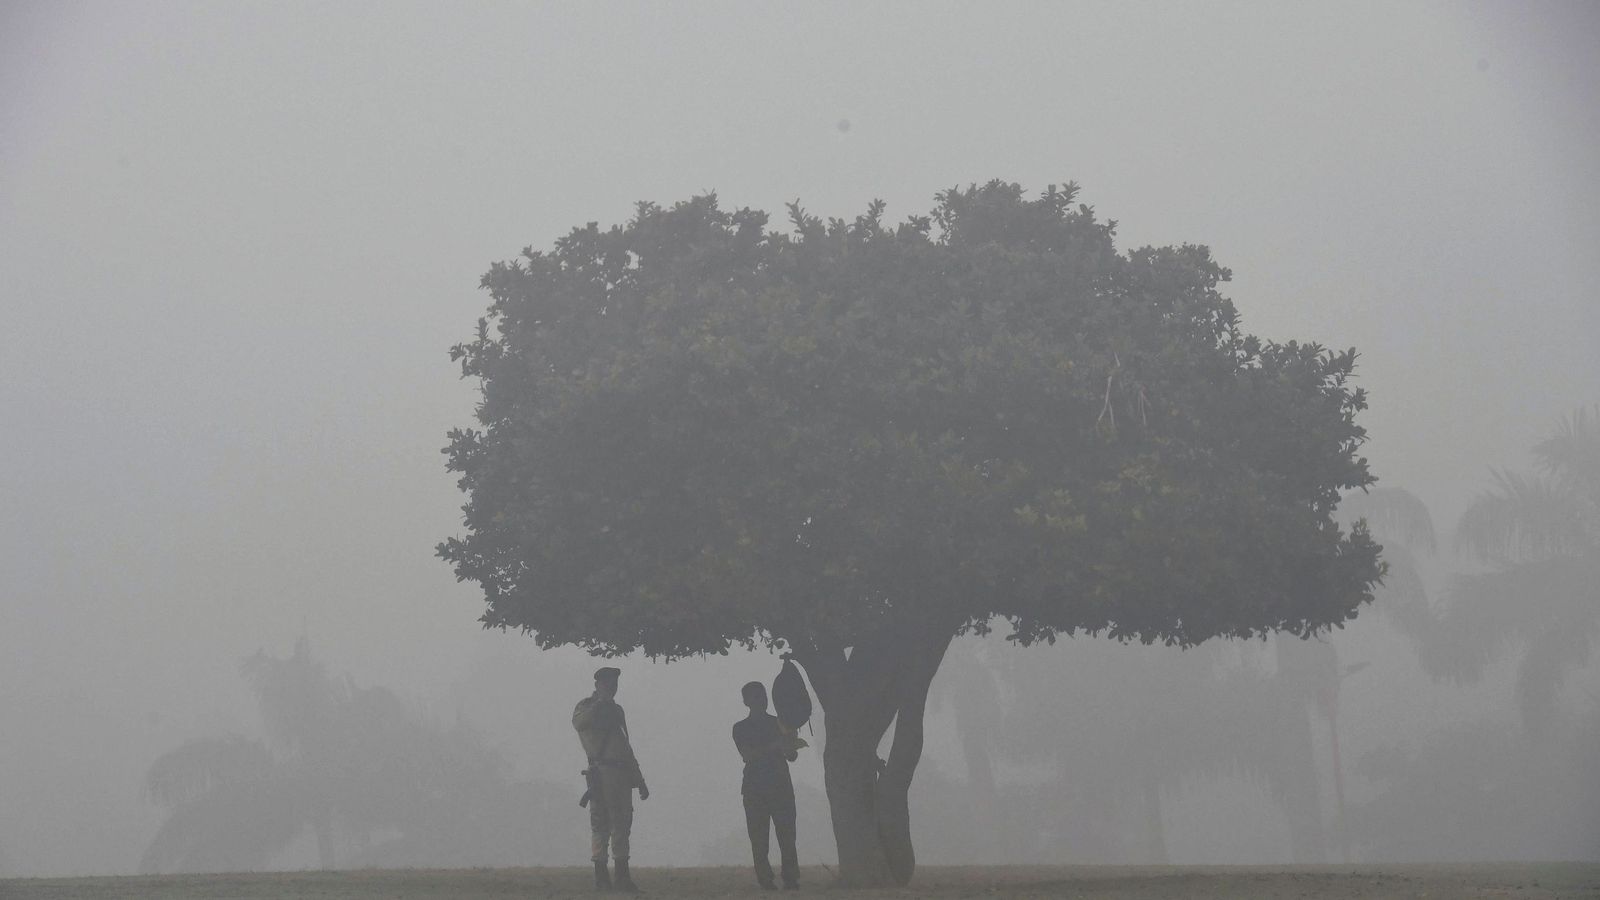 Air quality in New Delhi 'worse than smoking 50 cigarettes a day'